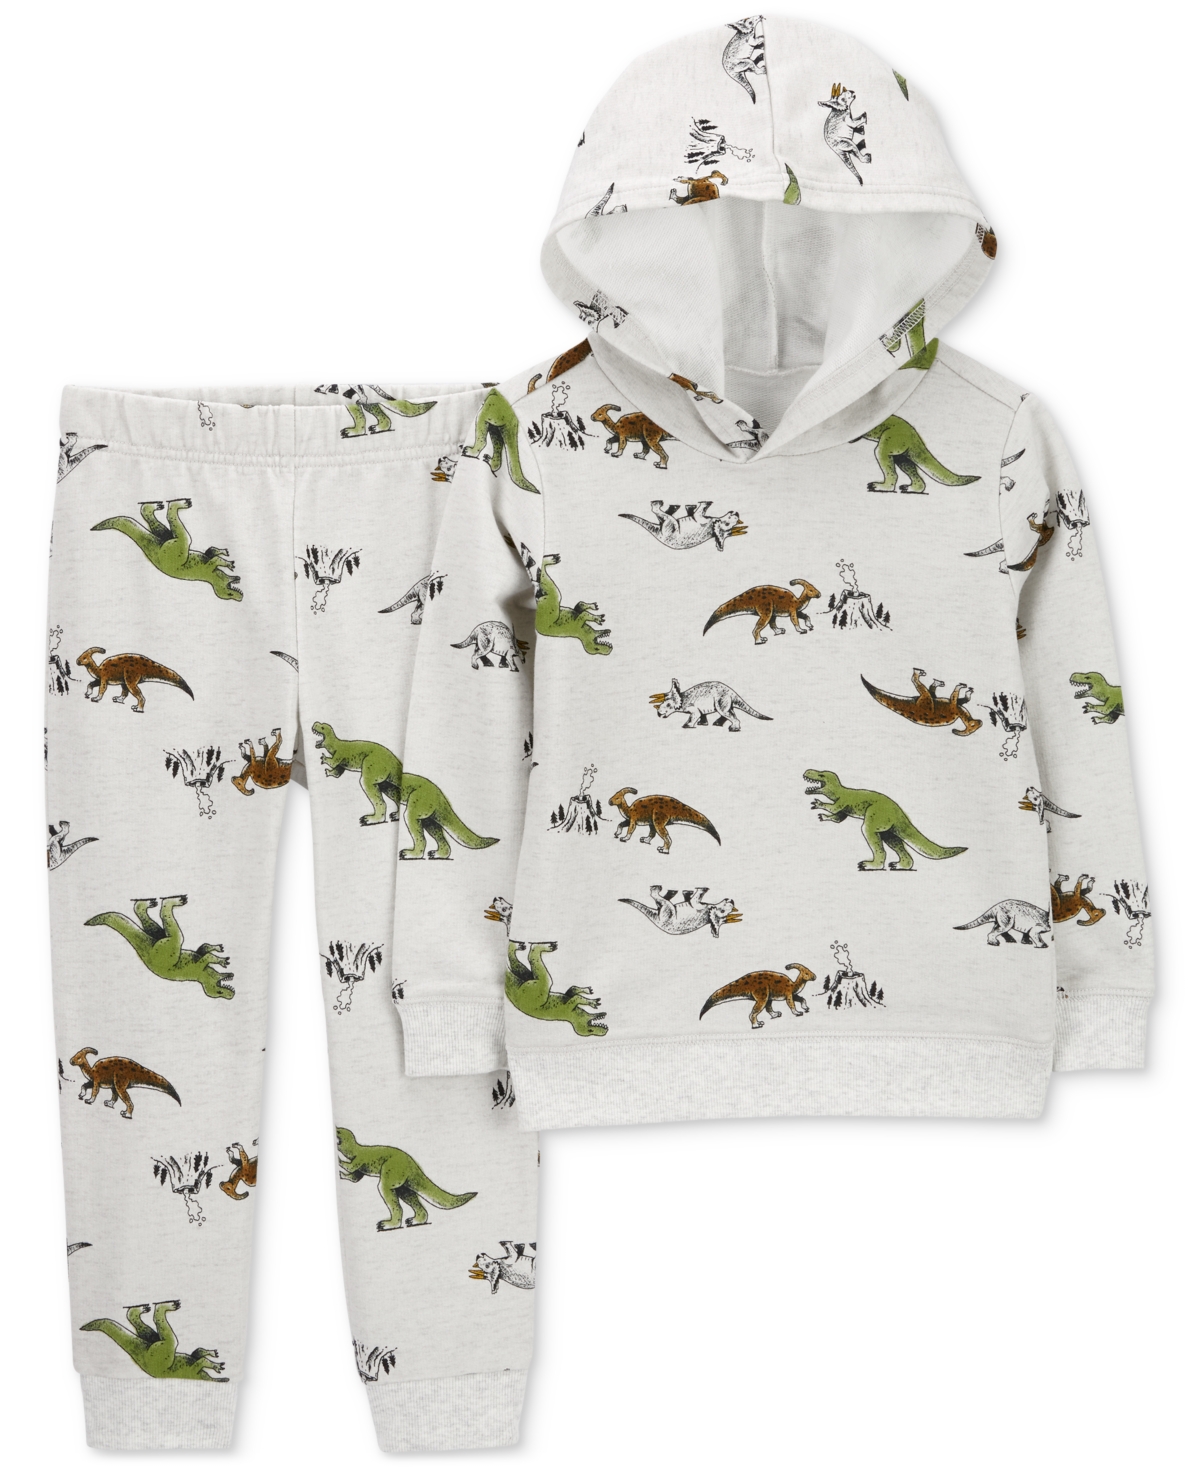 Carter's Babies' Toddler Boys 2-pc. Dinosaur Outfit Set In Gray